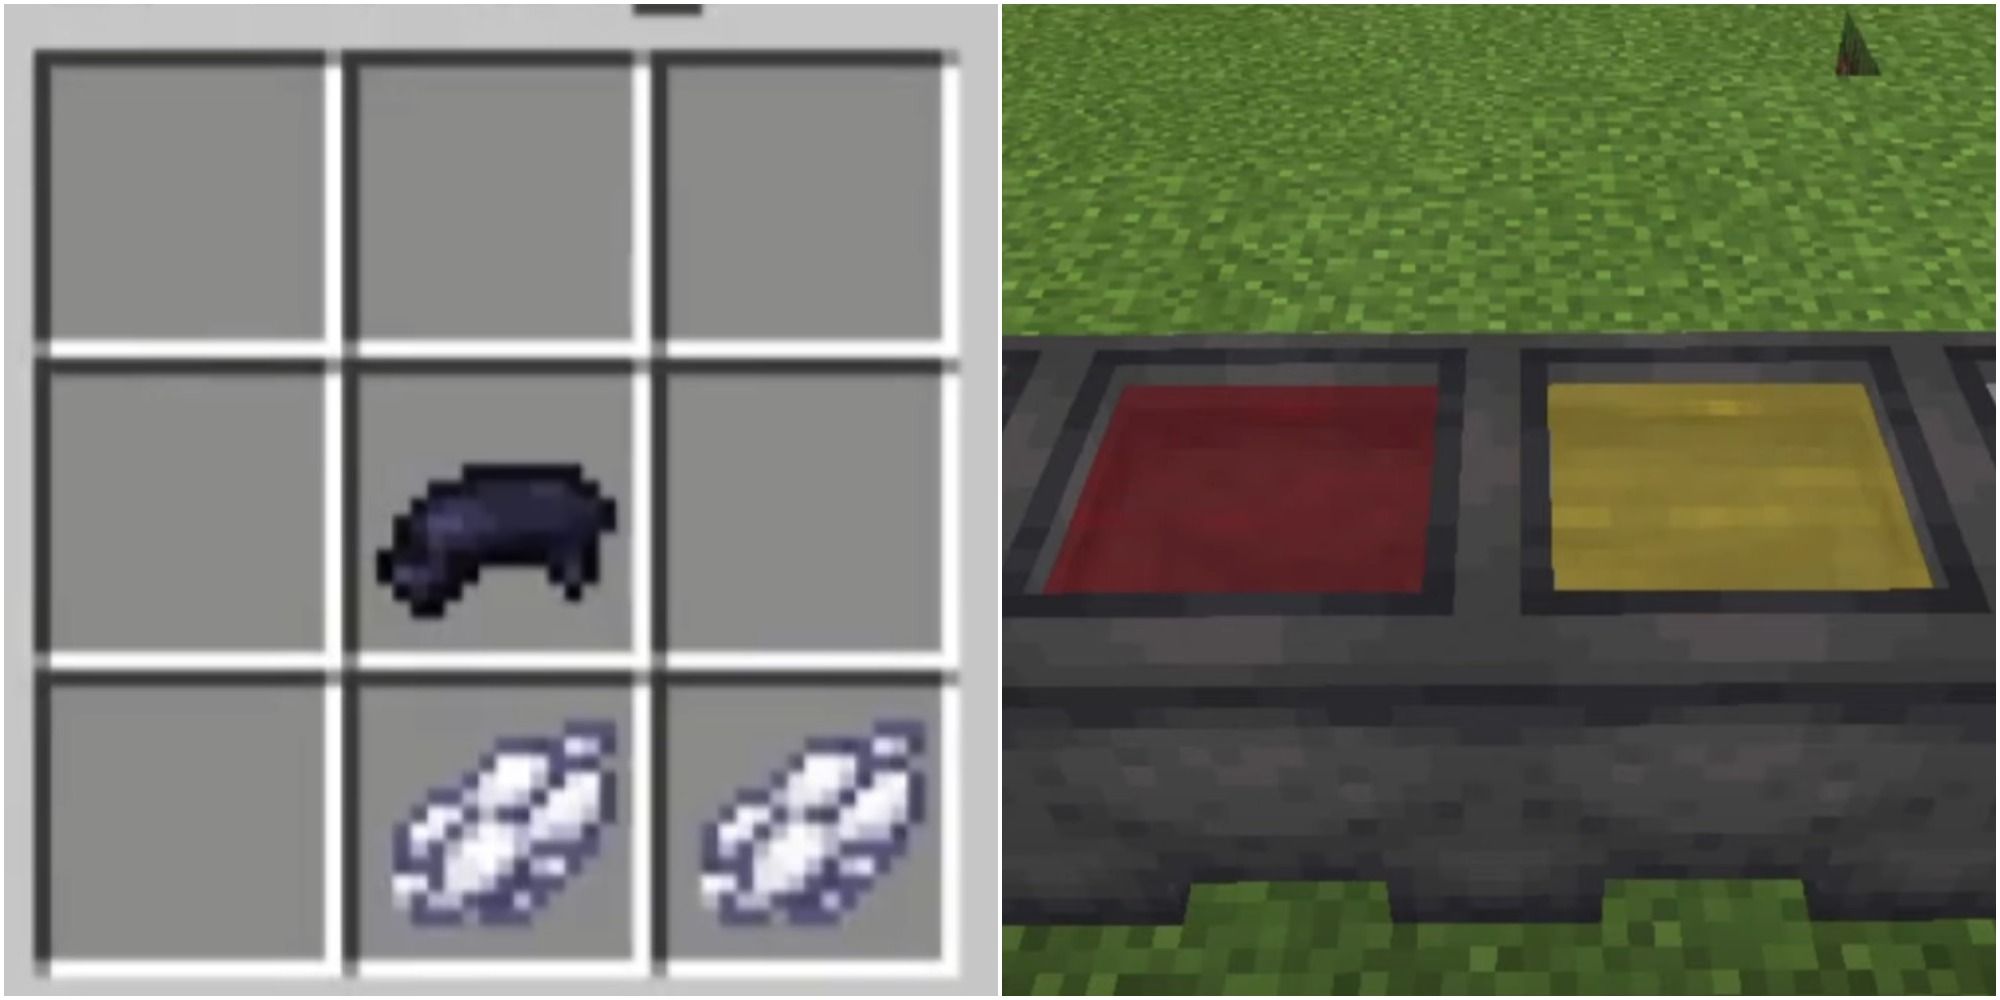 Leather Pants, How to craft leather pants in Minecraft